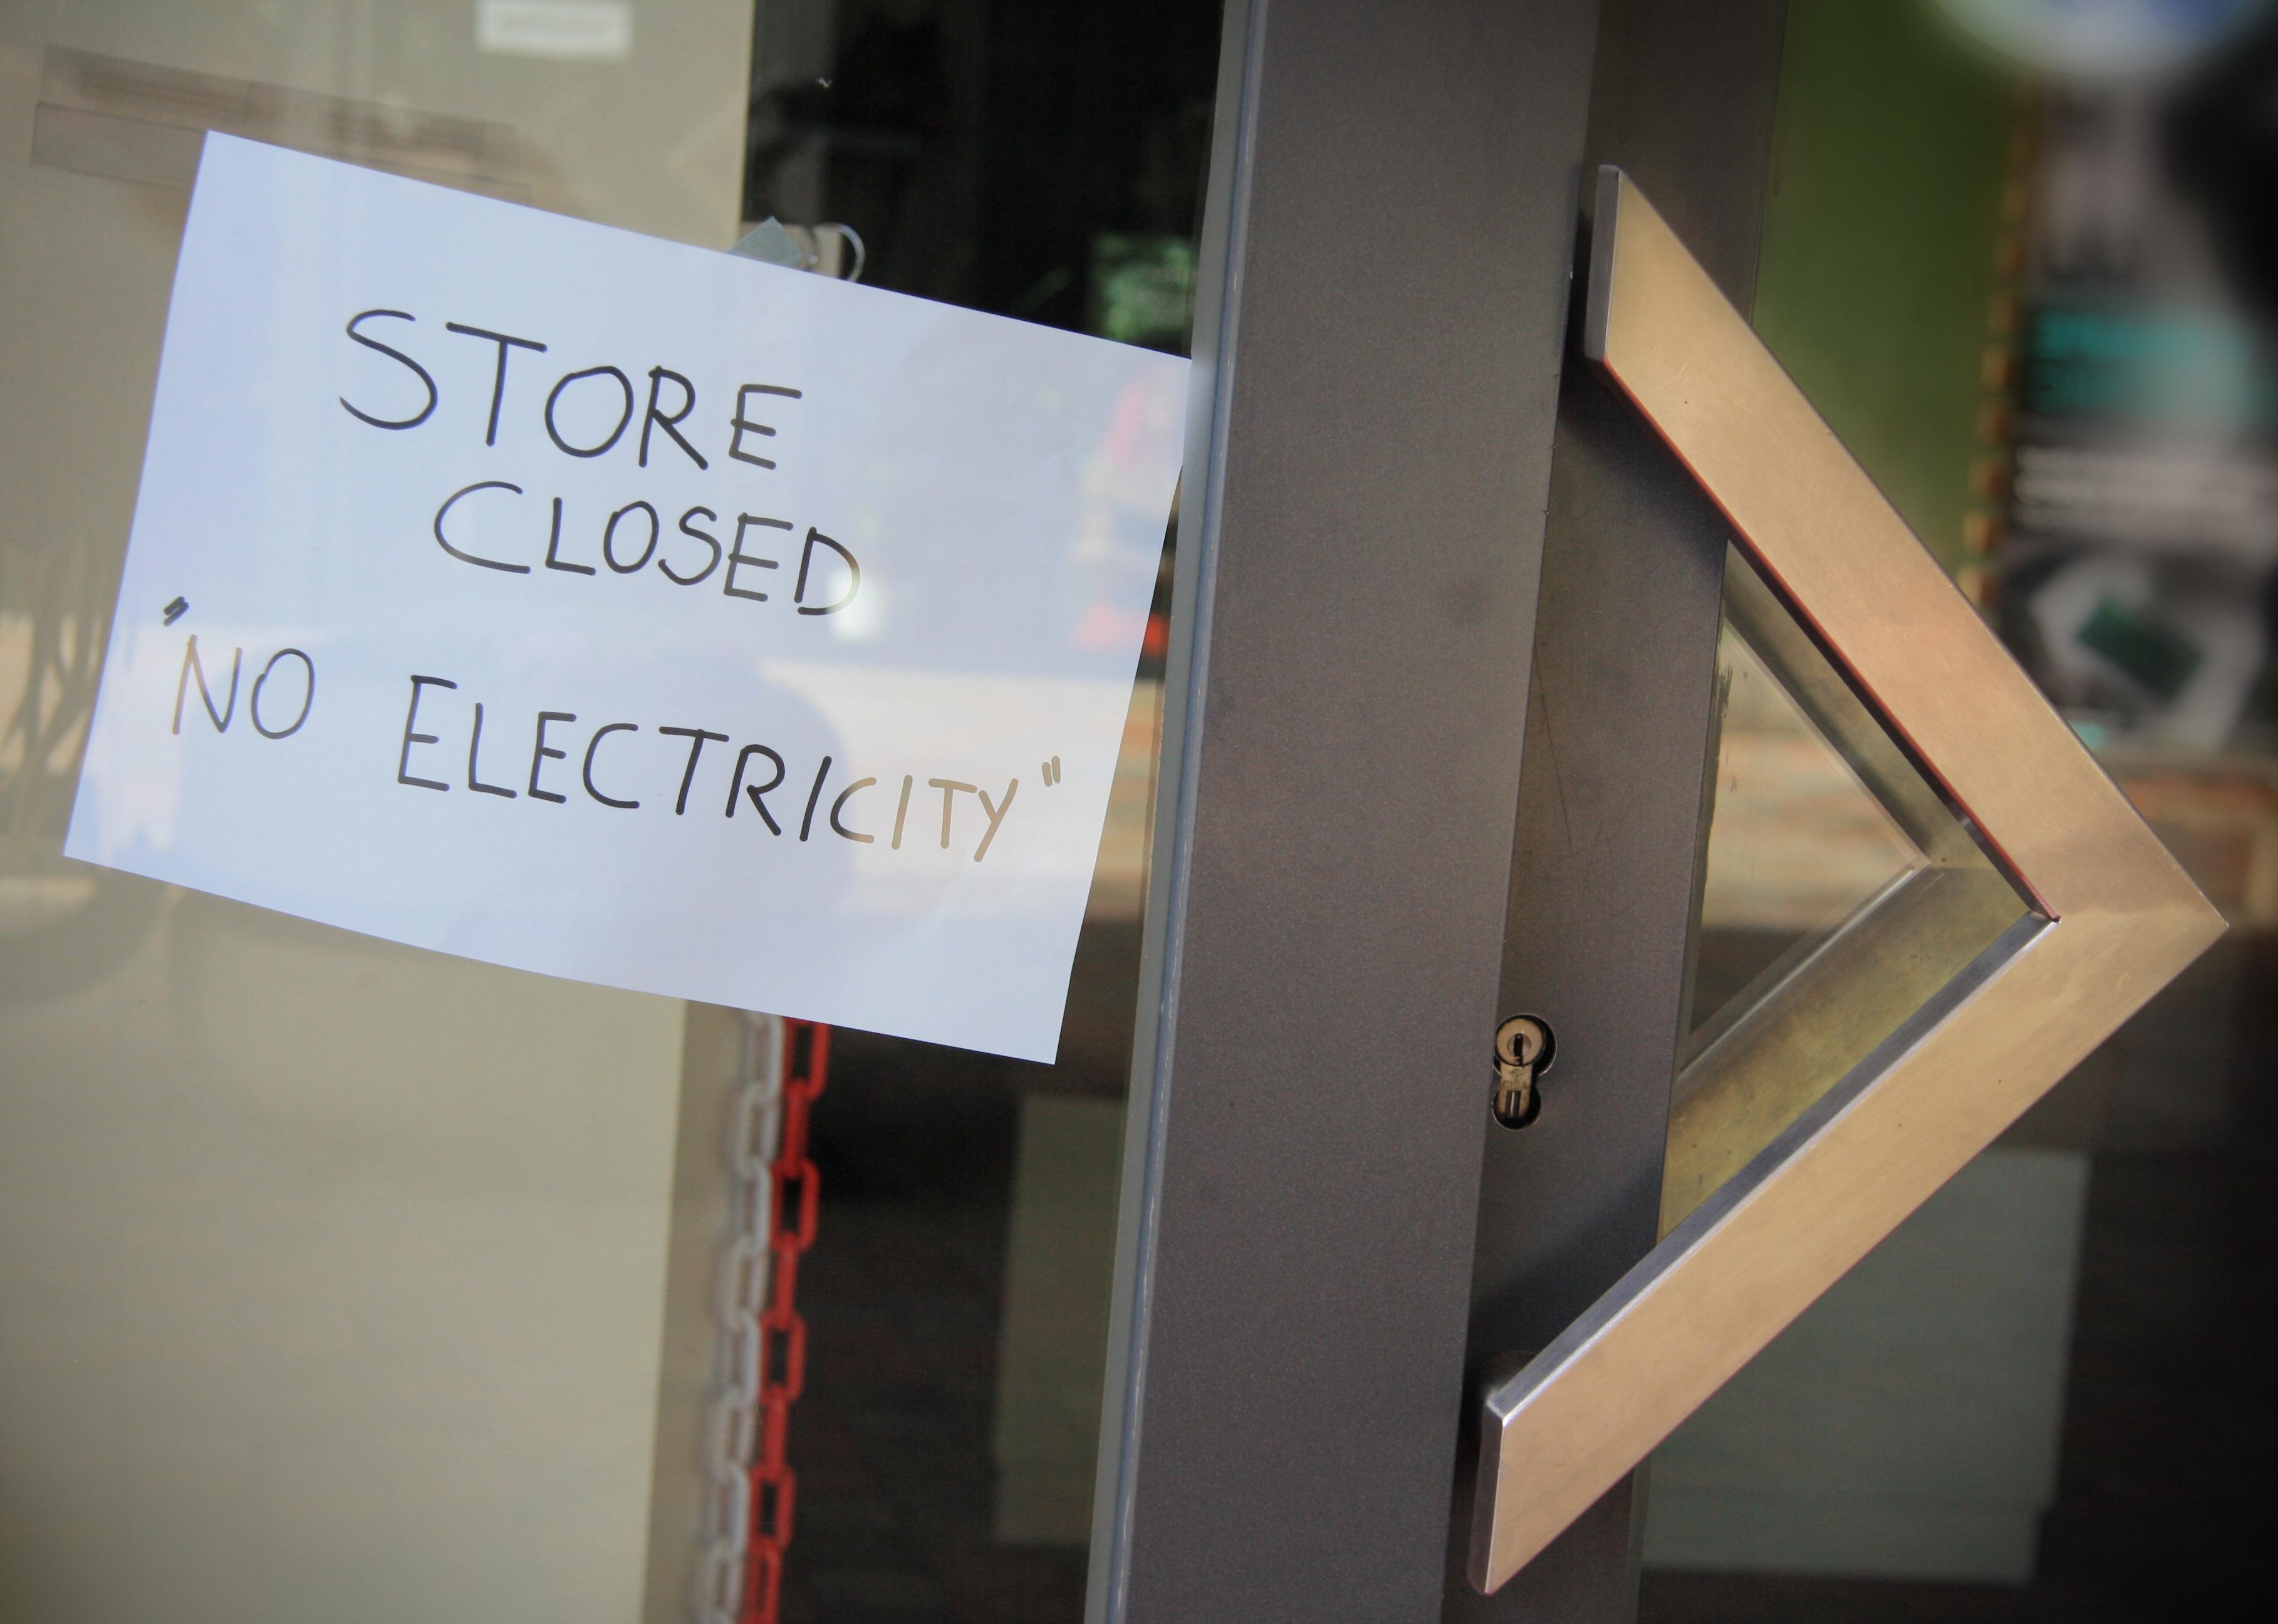 Sign posted in a shop window: Shop closed, no electricity.